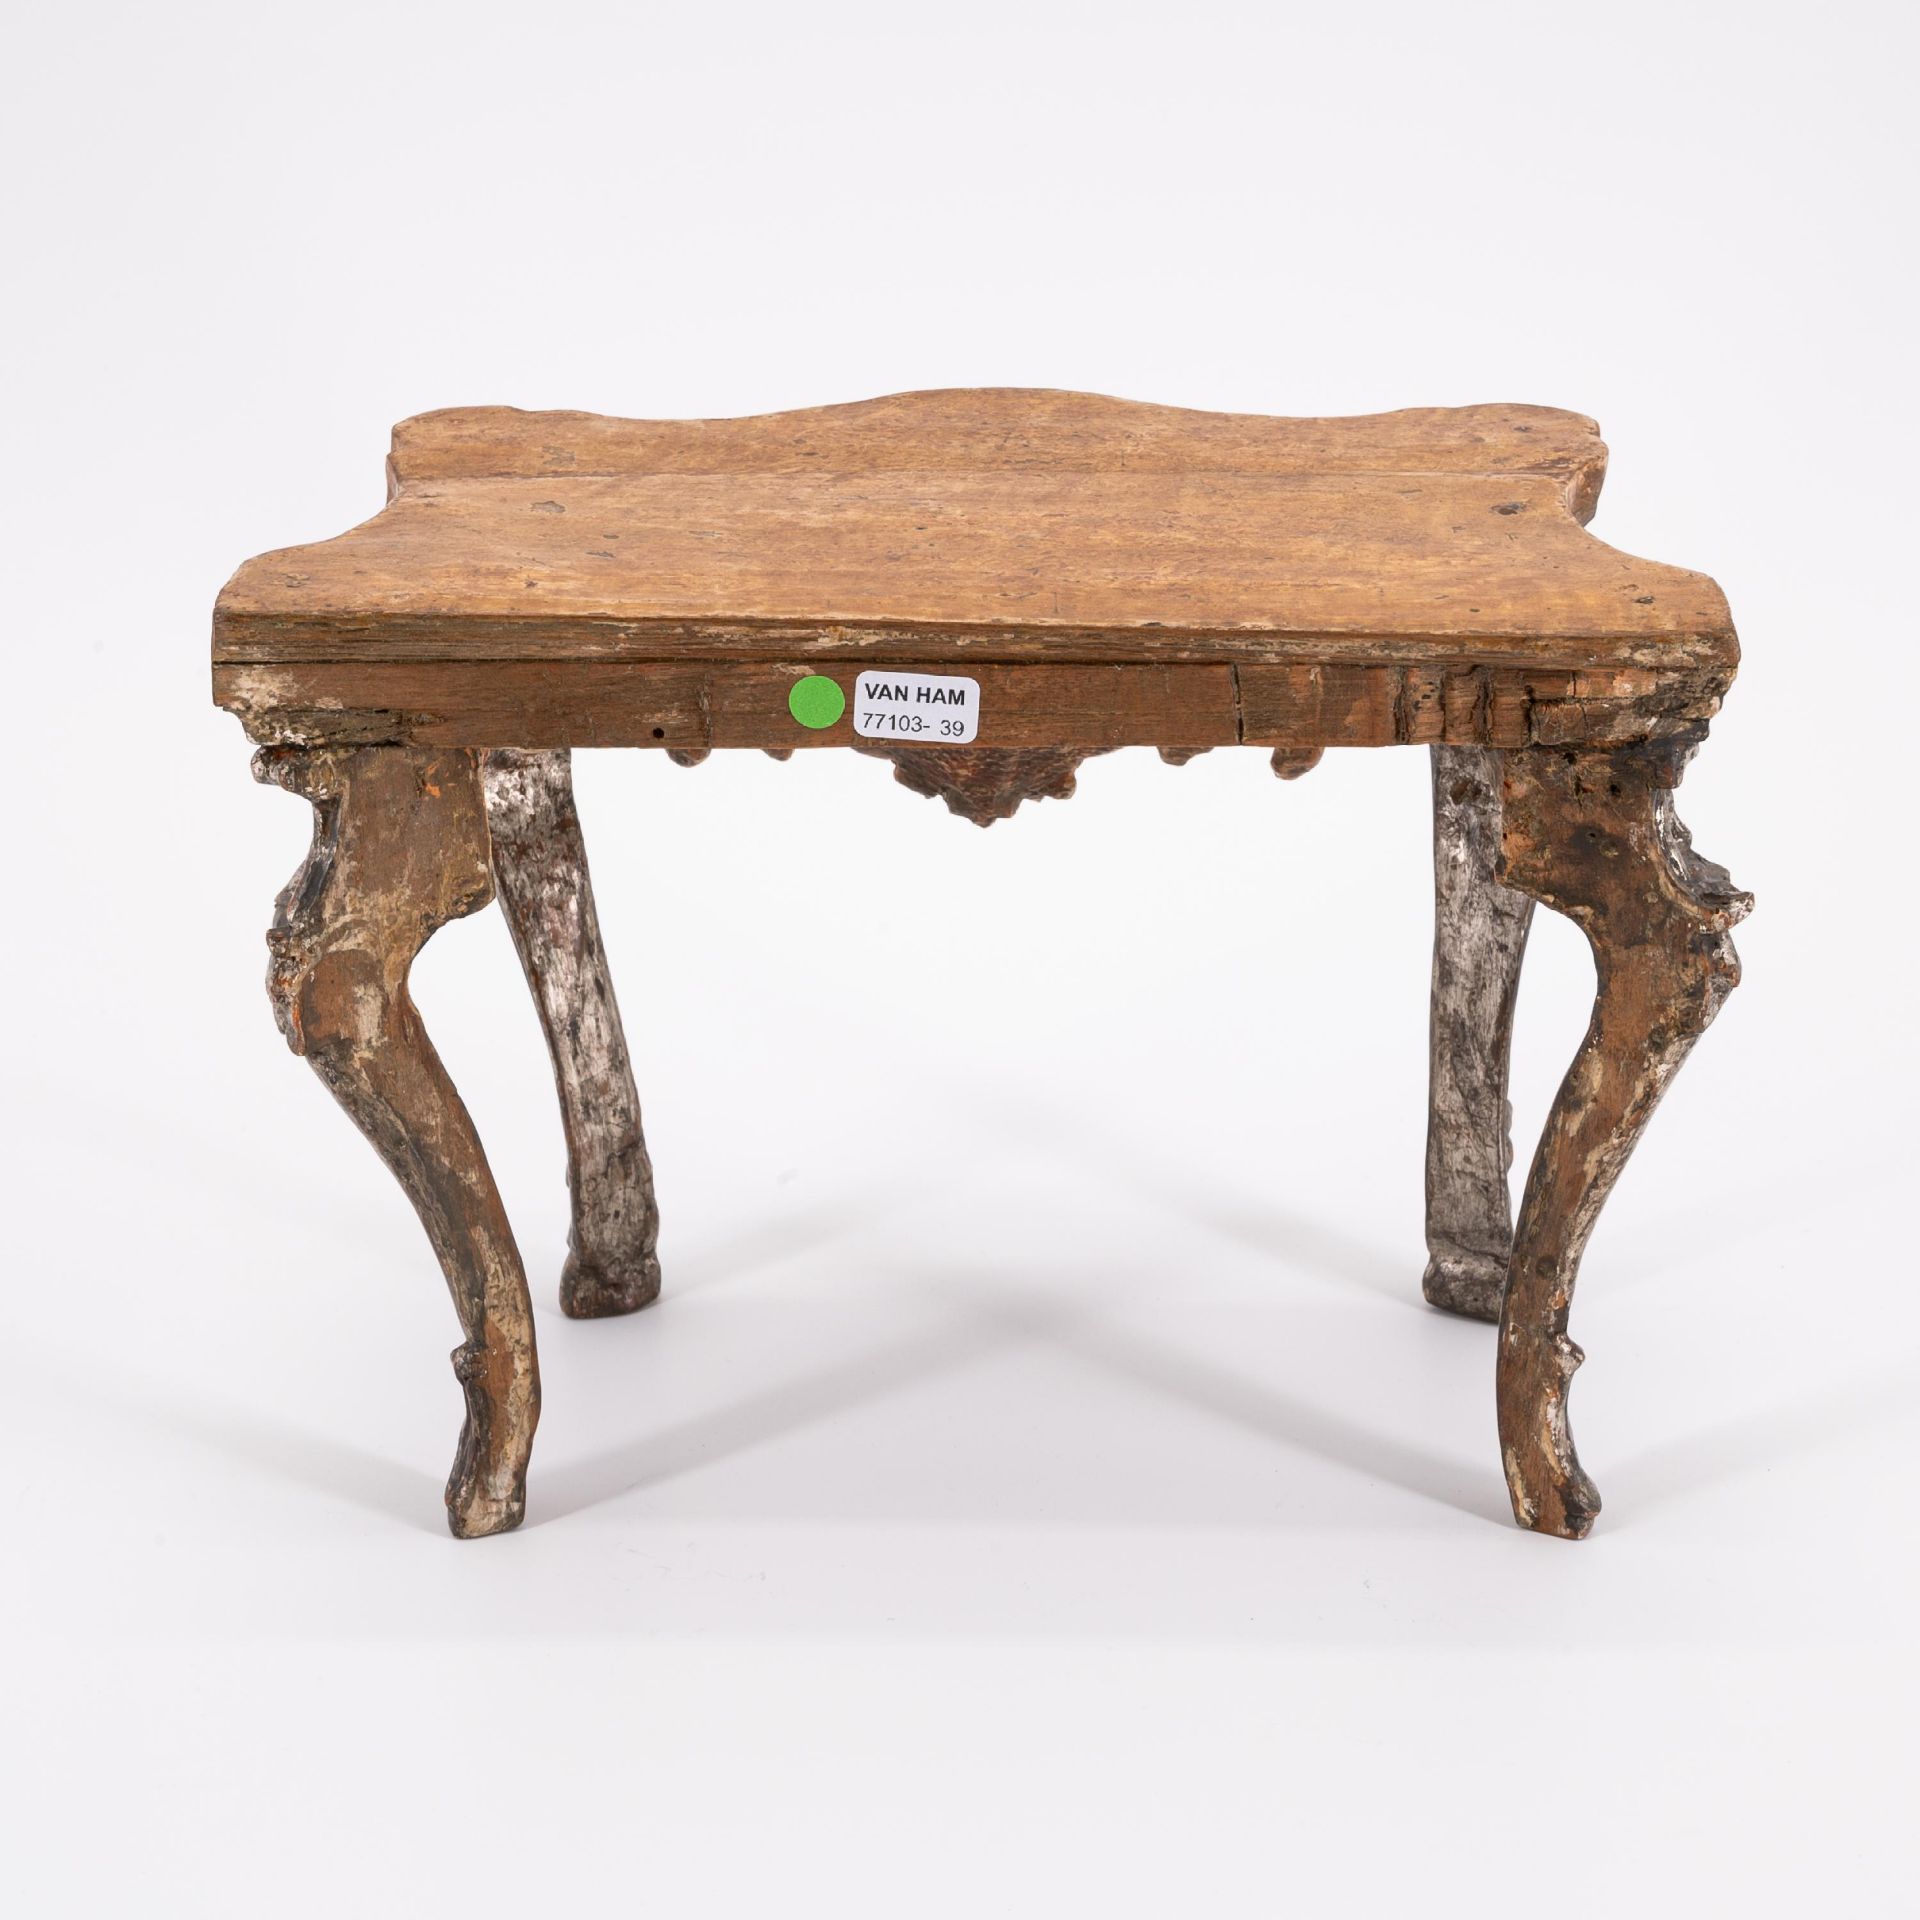 Venice: SMALL WOODEN MINIATURE CONSOLE TABLE WITH TROMPE L'OEUIL MARBLE PLATE - Image 5 of 6